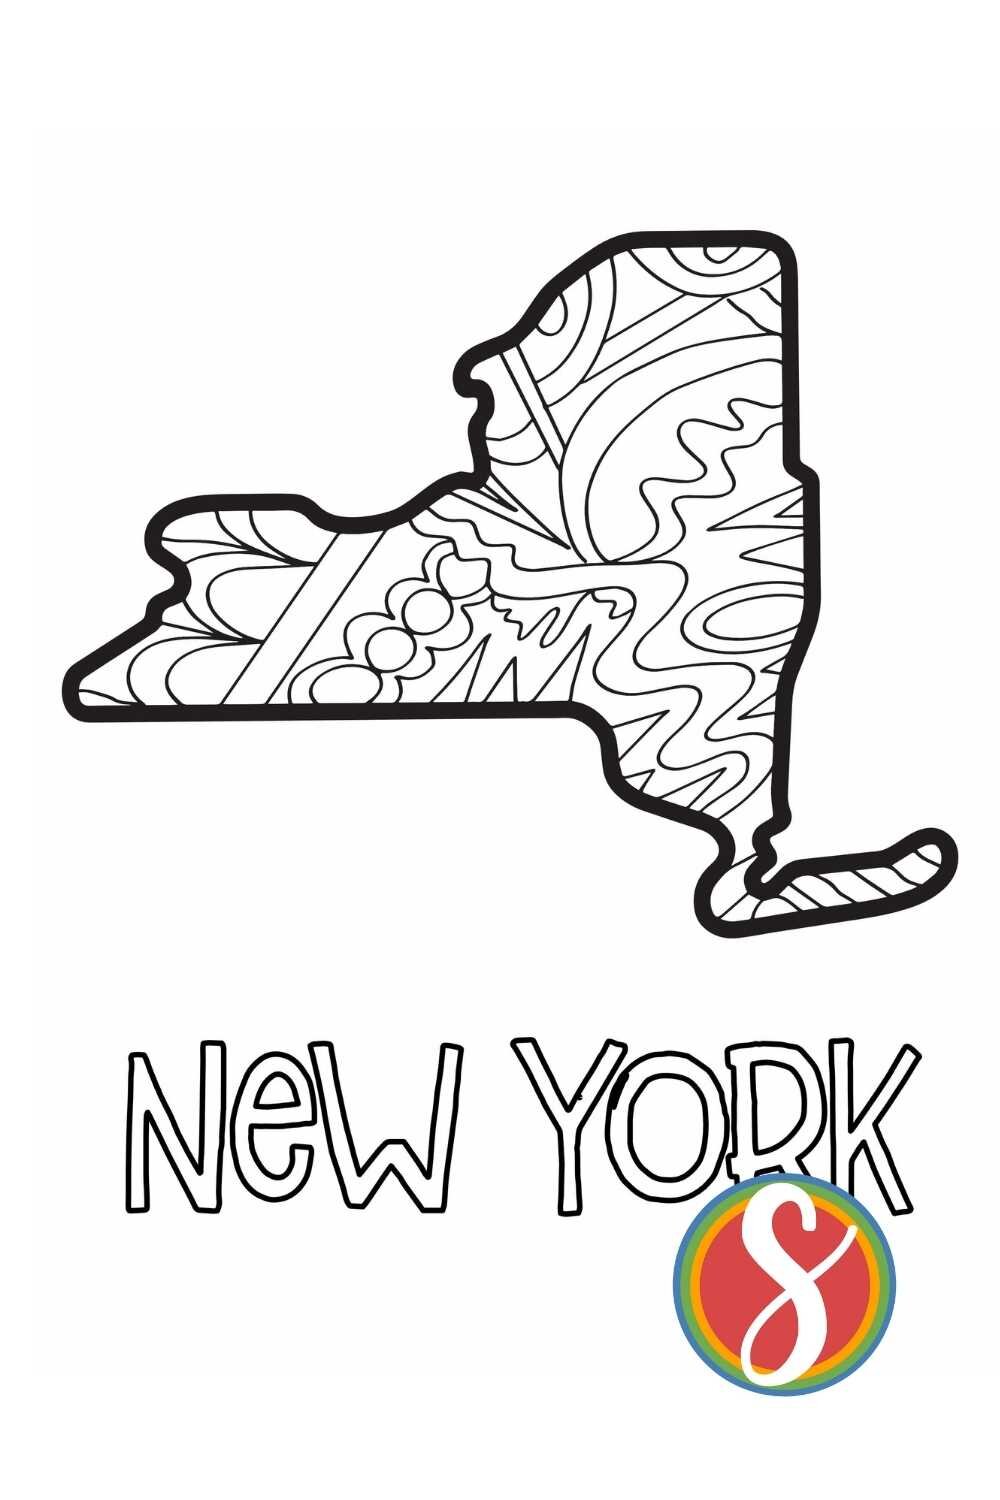 Free new york coloring pages â stevie doodles